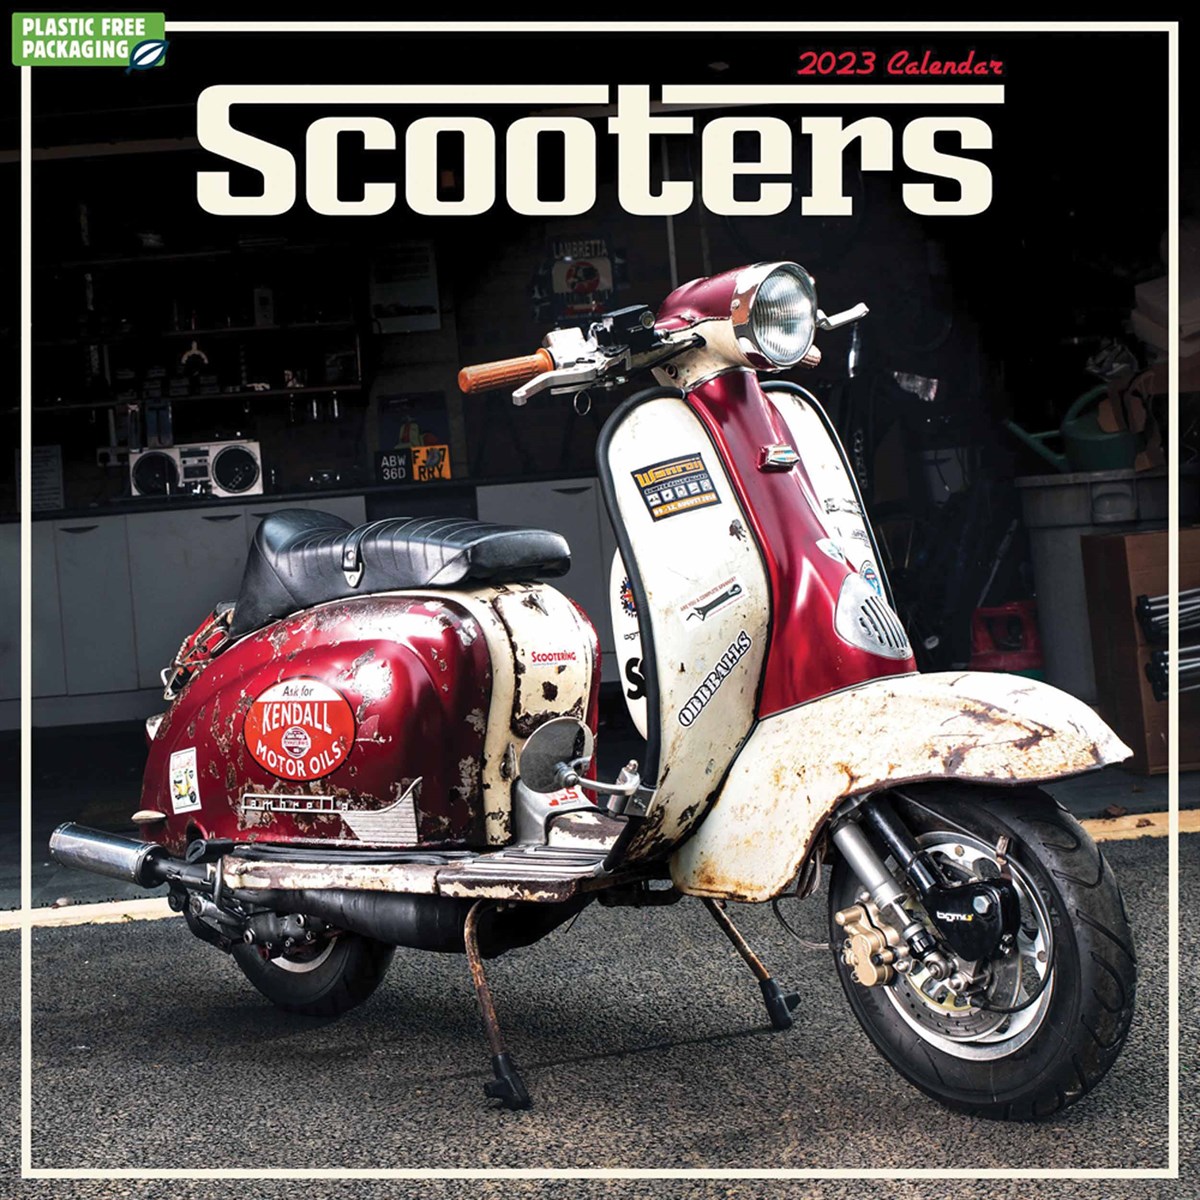 Scooters 2023 Calendars